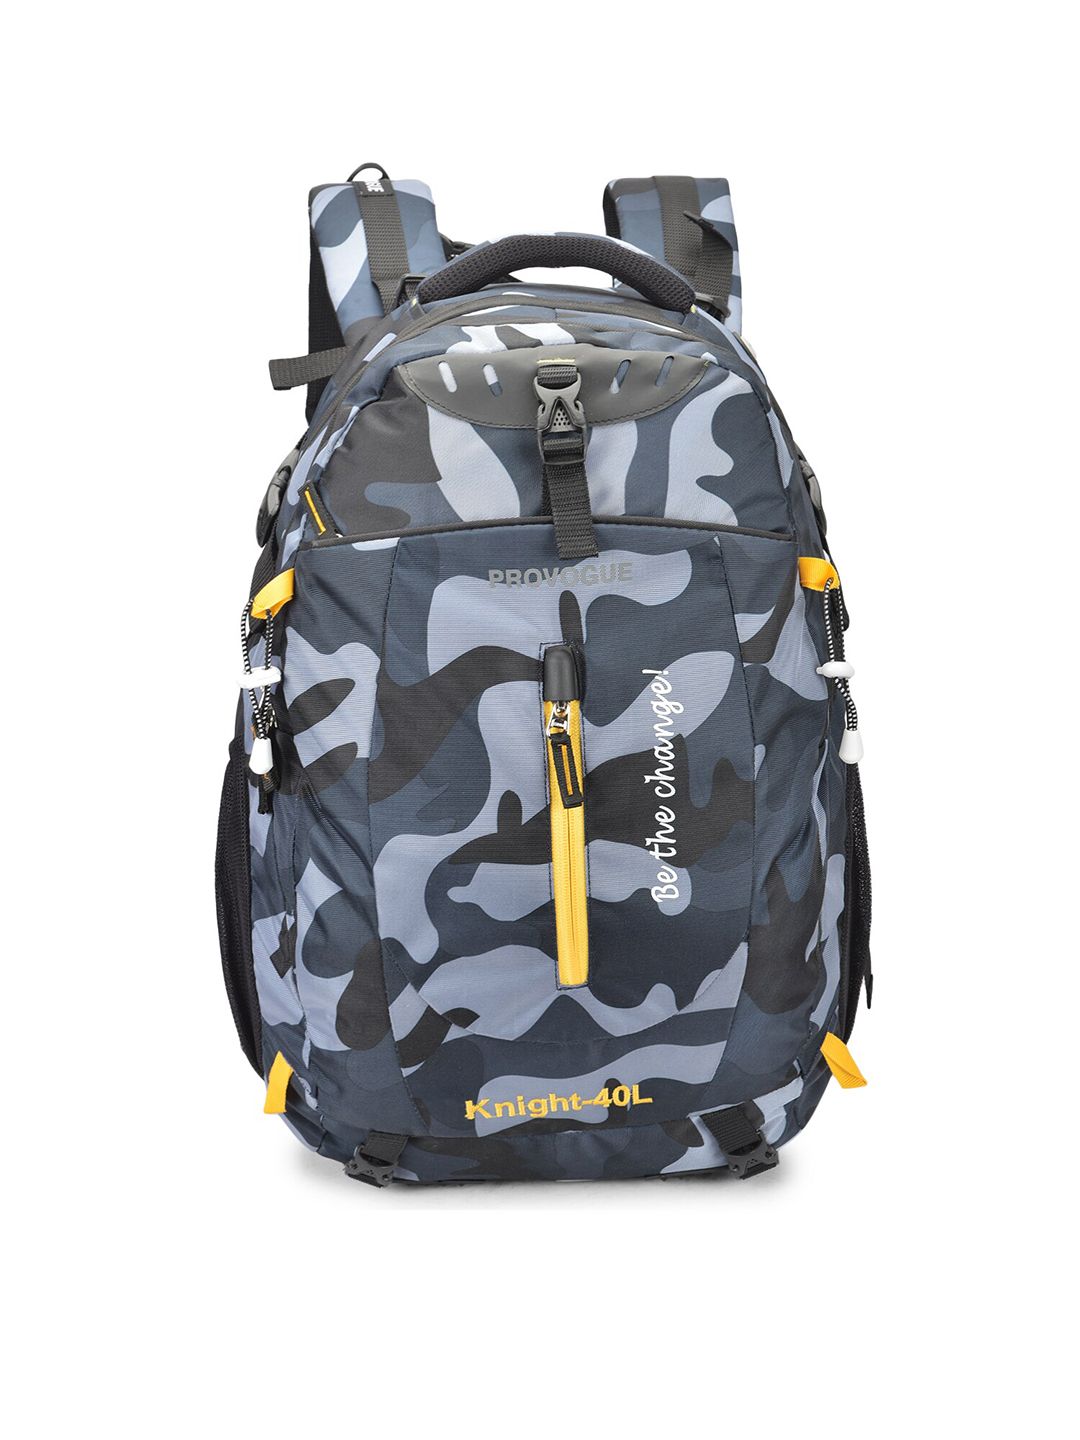 Provogue Unisex Grey & Blue Camouflage Backpack with Reflective Strip Price in India